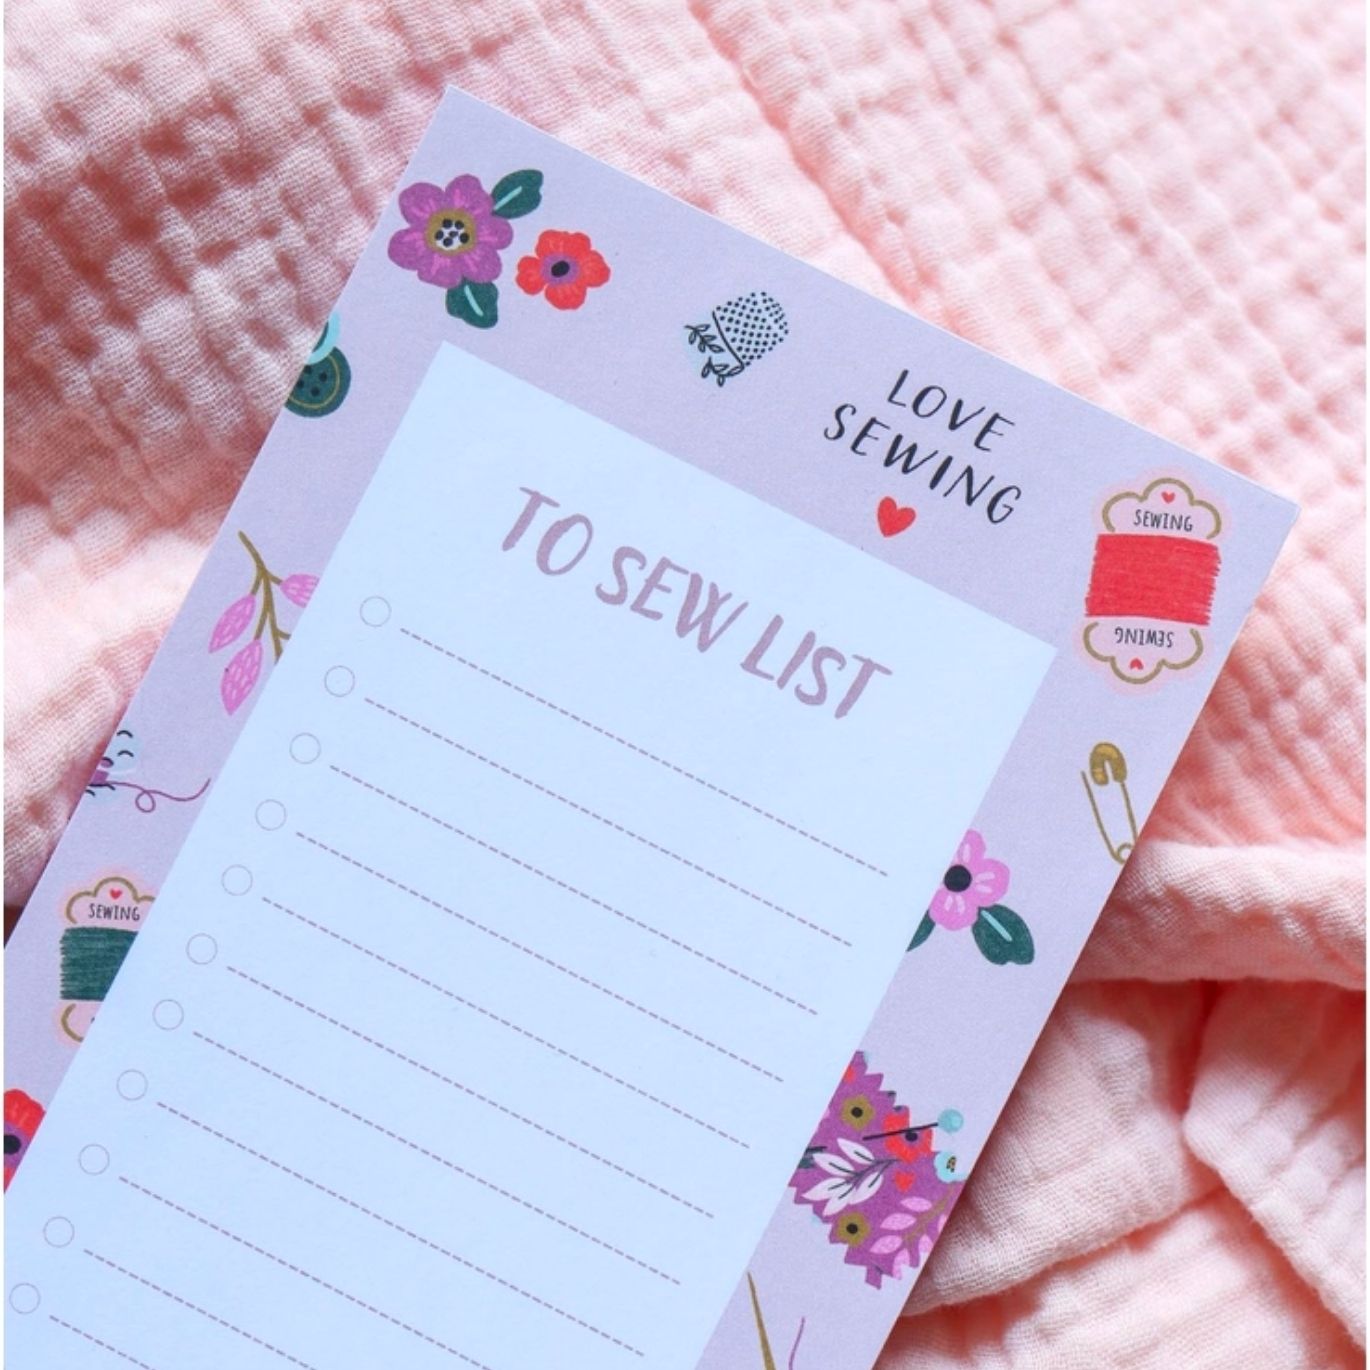 Bloc-notes "To sew list" - Lise Tailor